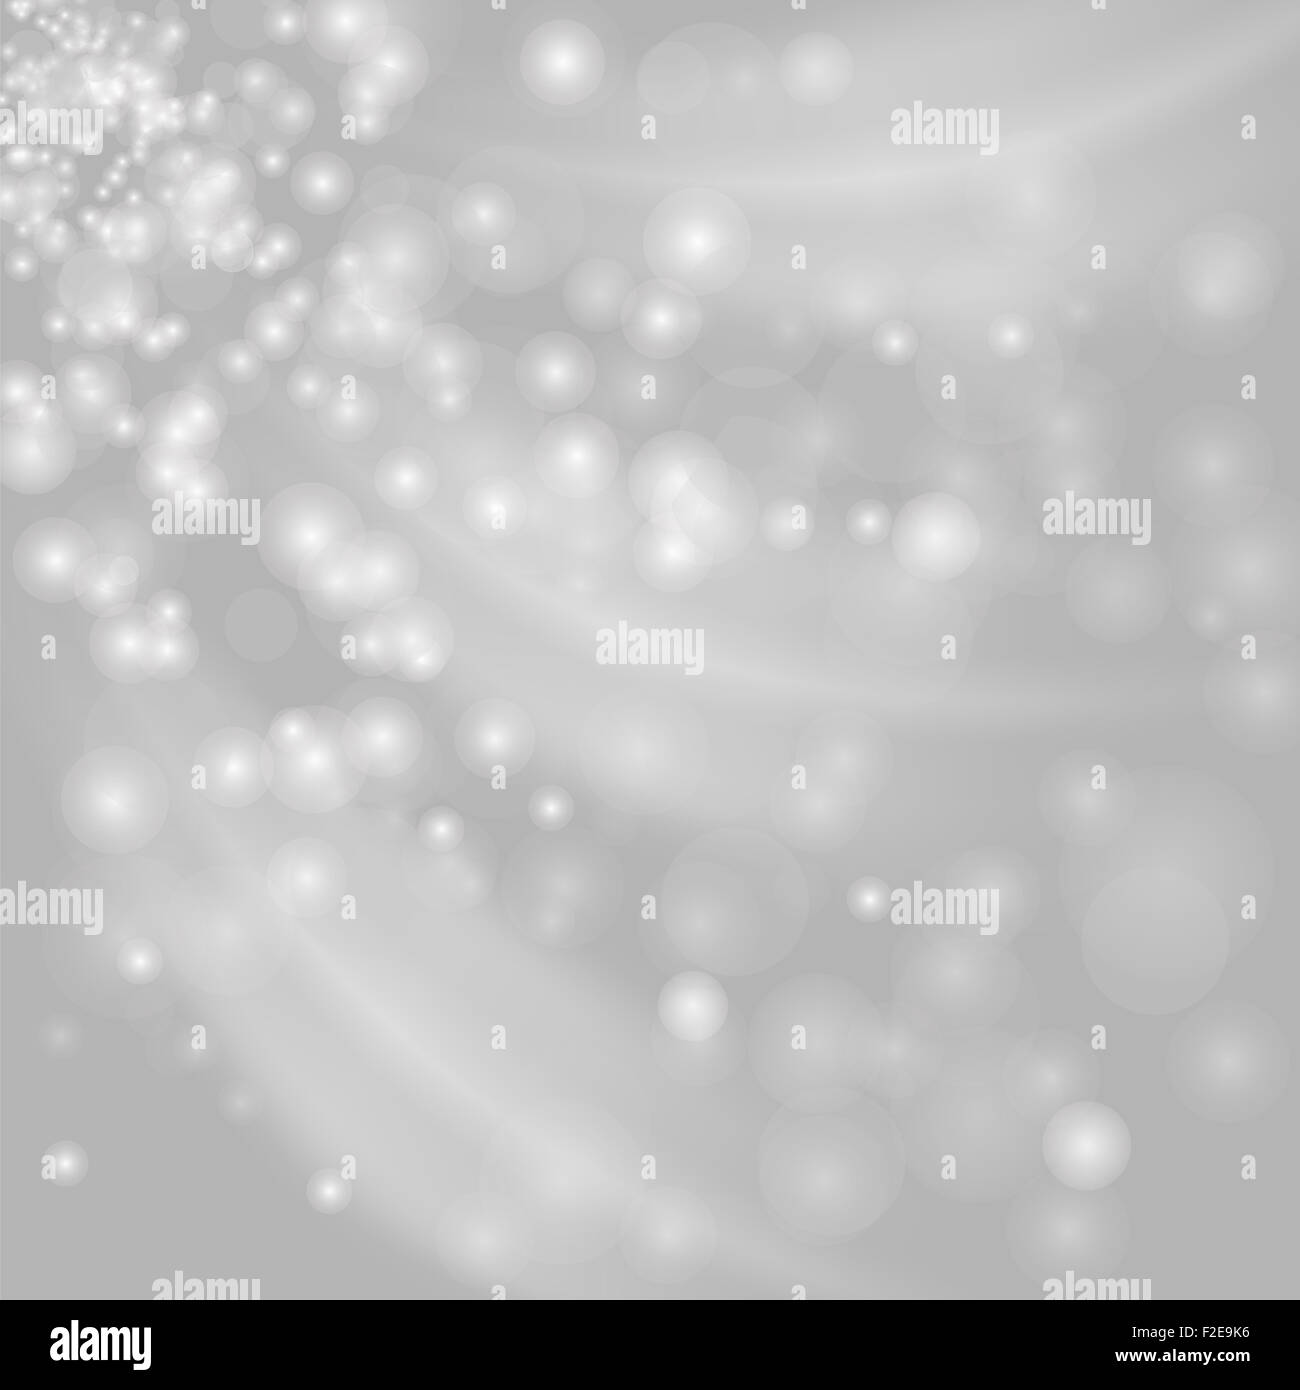 Abstract Light Background Stock Photo